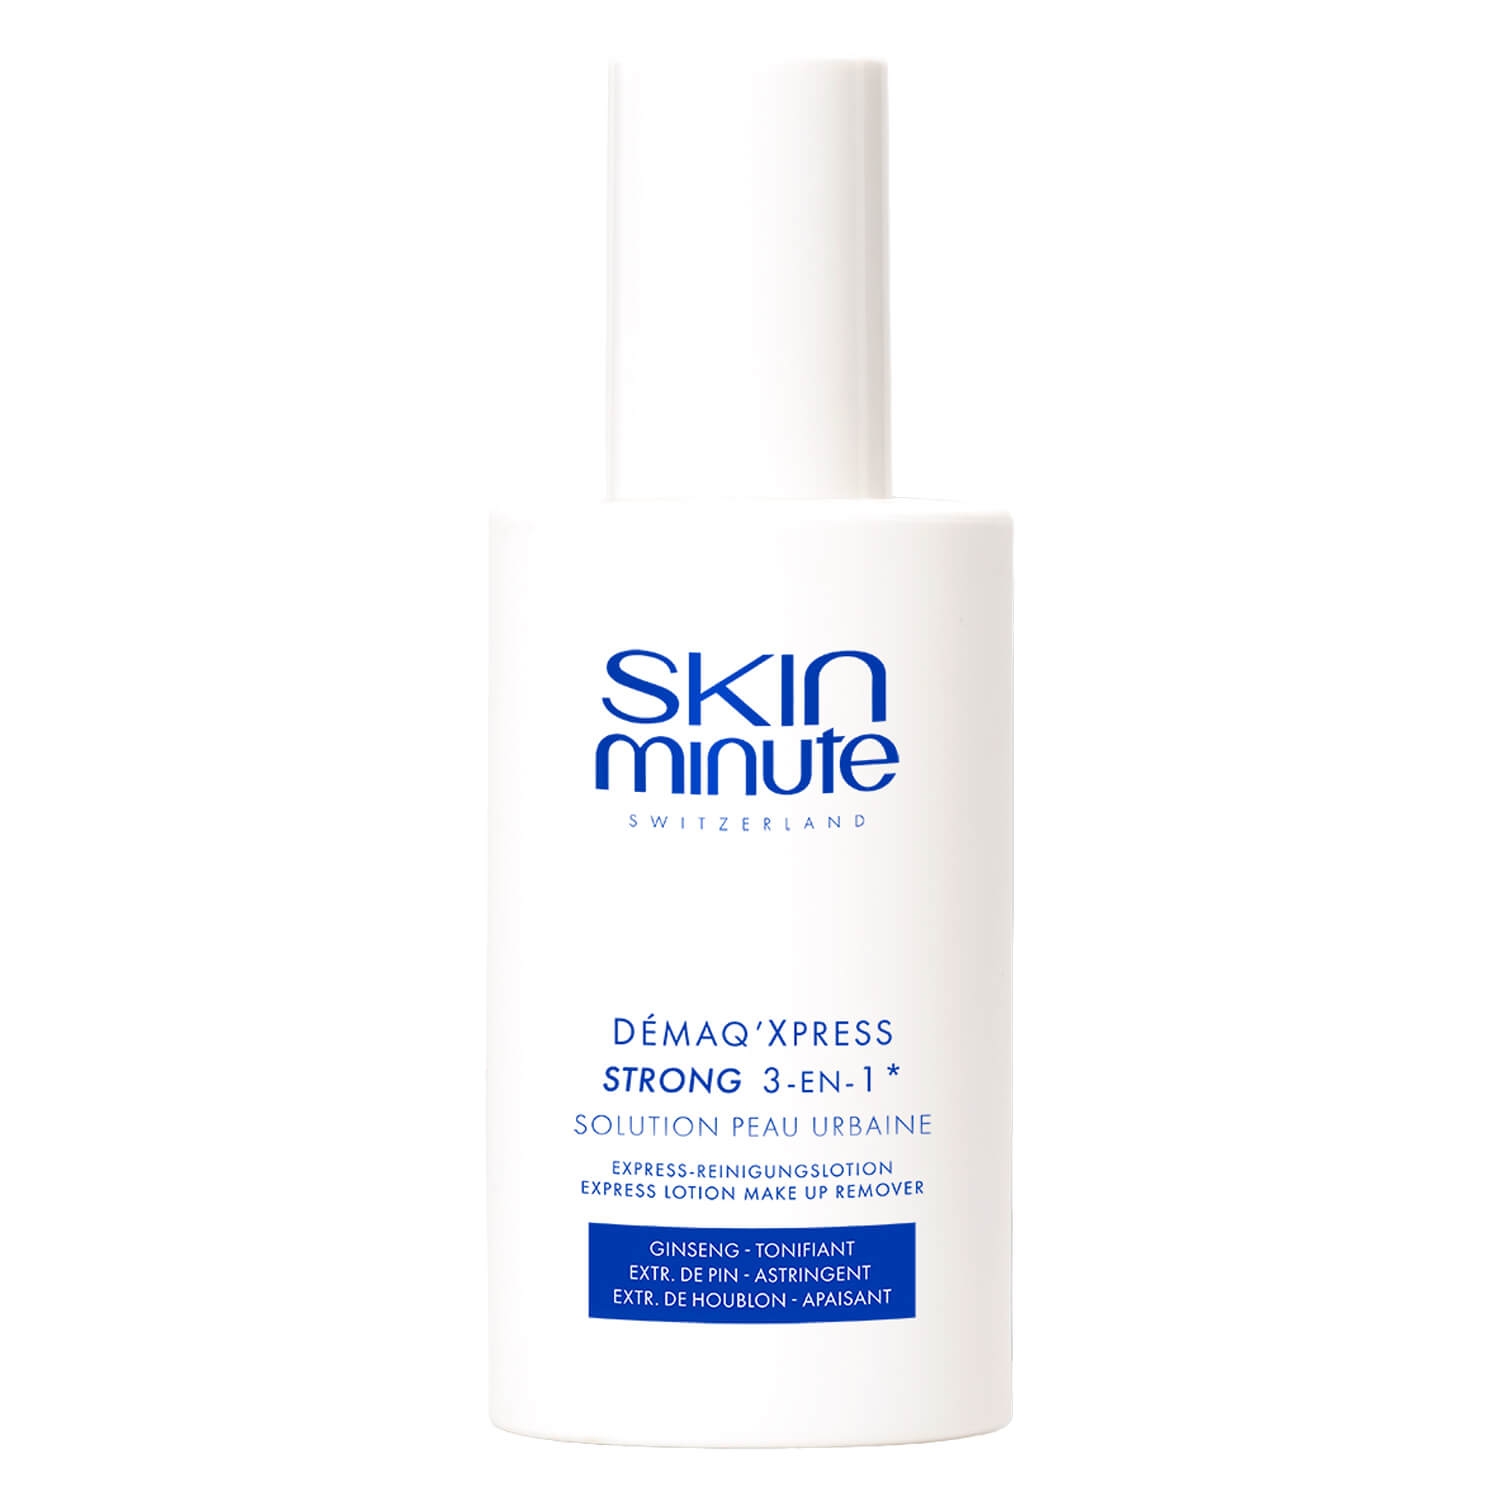 Product image from skinminute - Express Reinigungslotion Strong